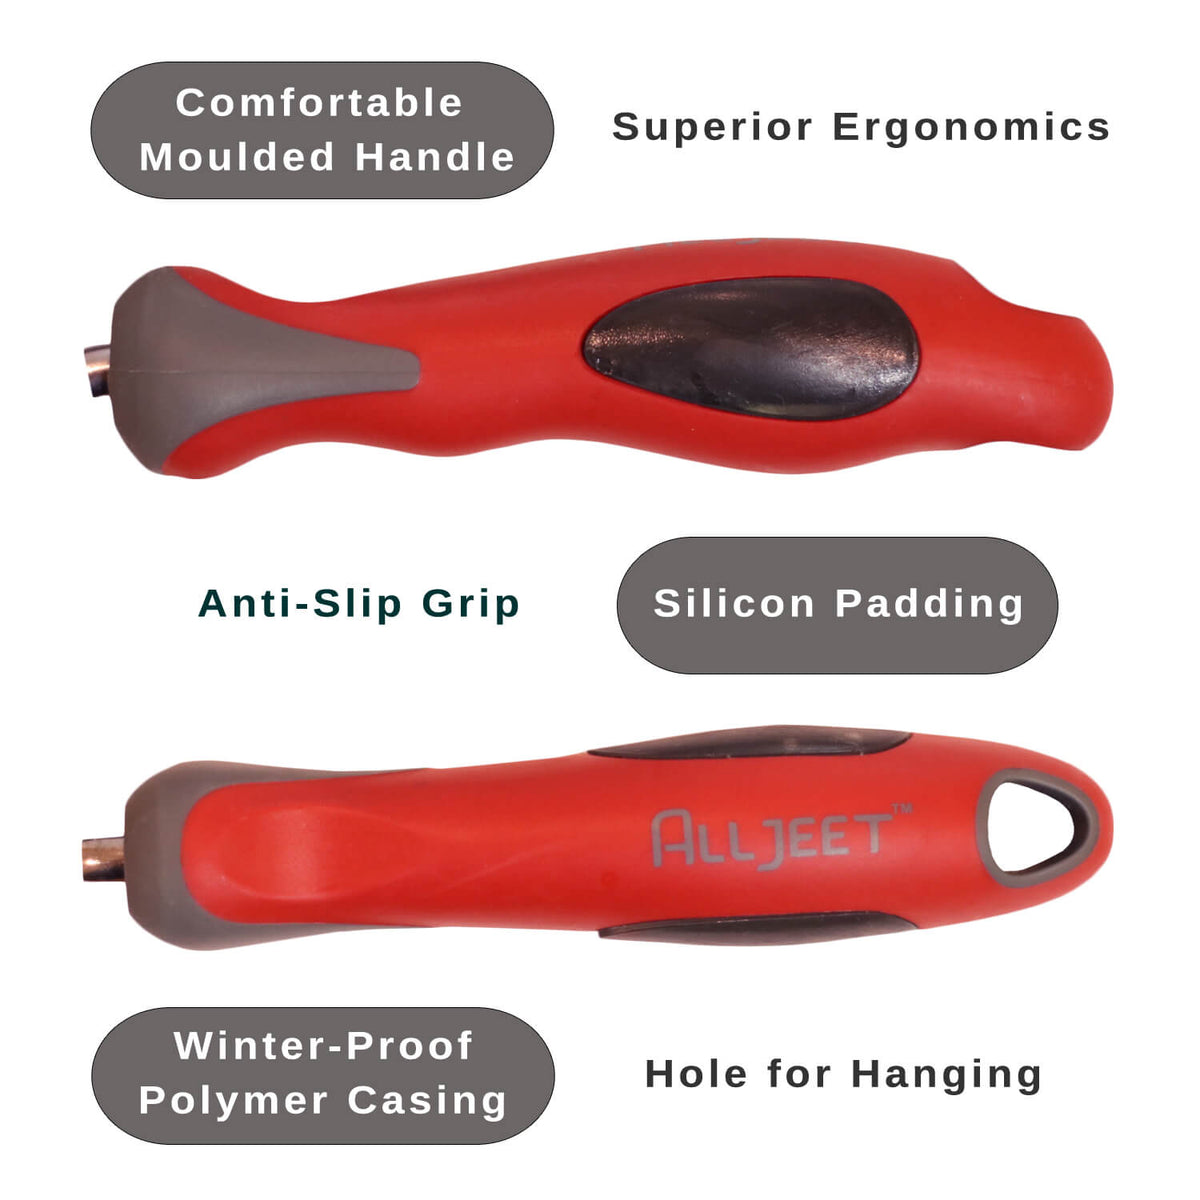 garden tools with moulded handles, anti slip grip, and hole for hanging